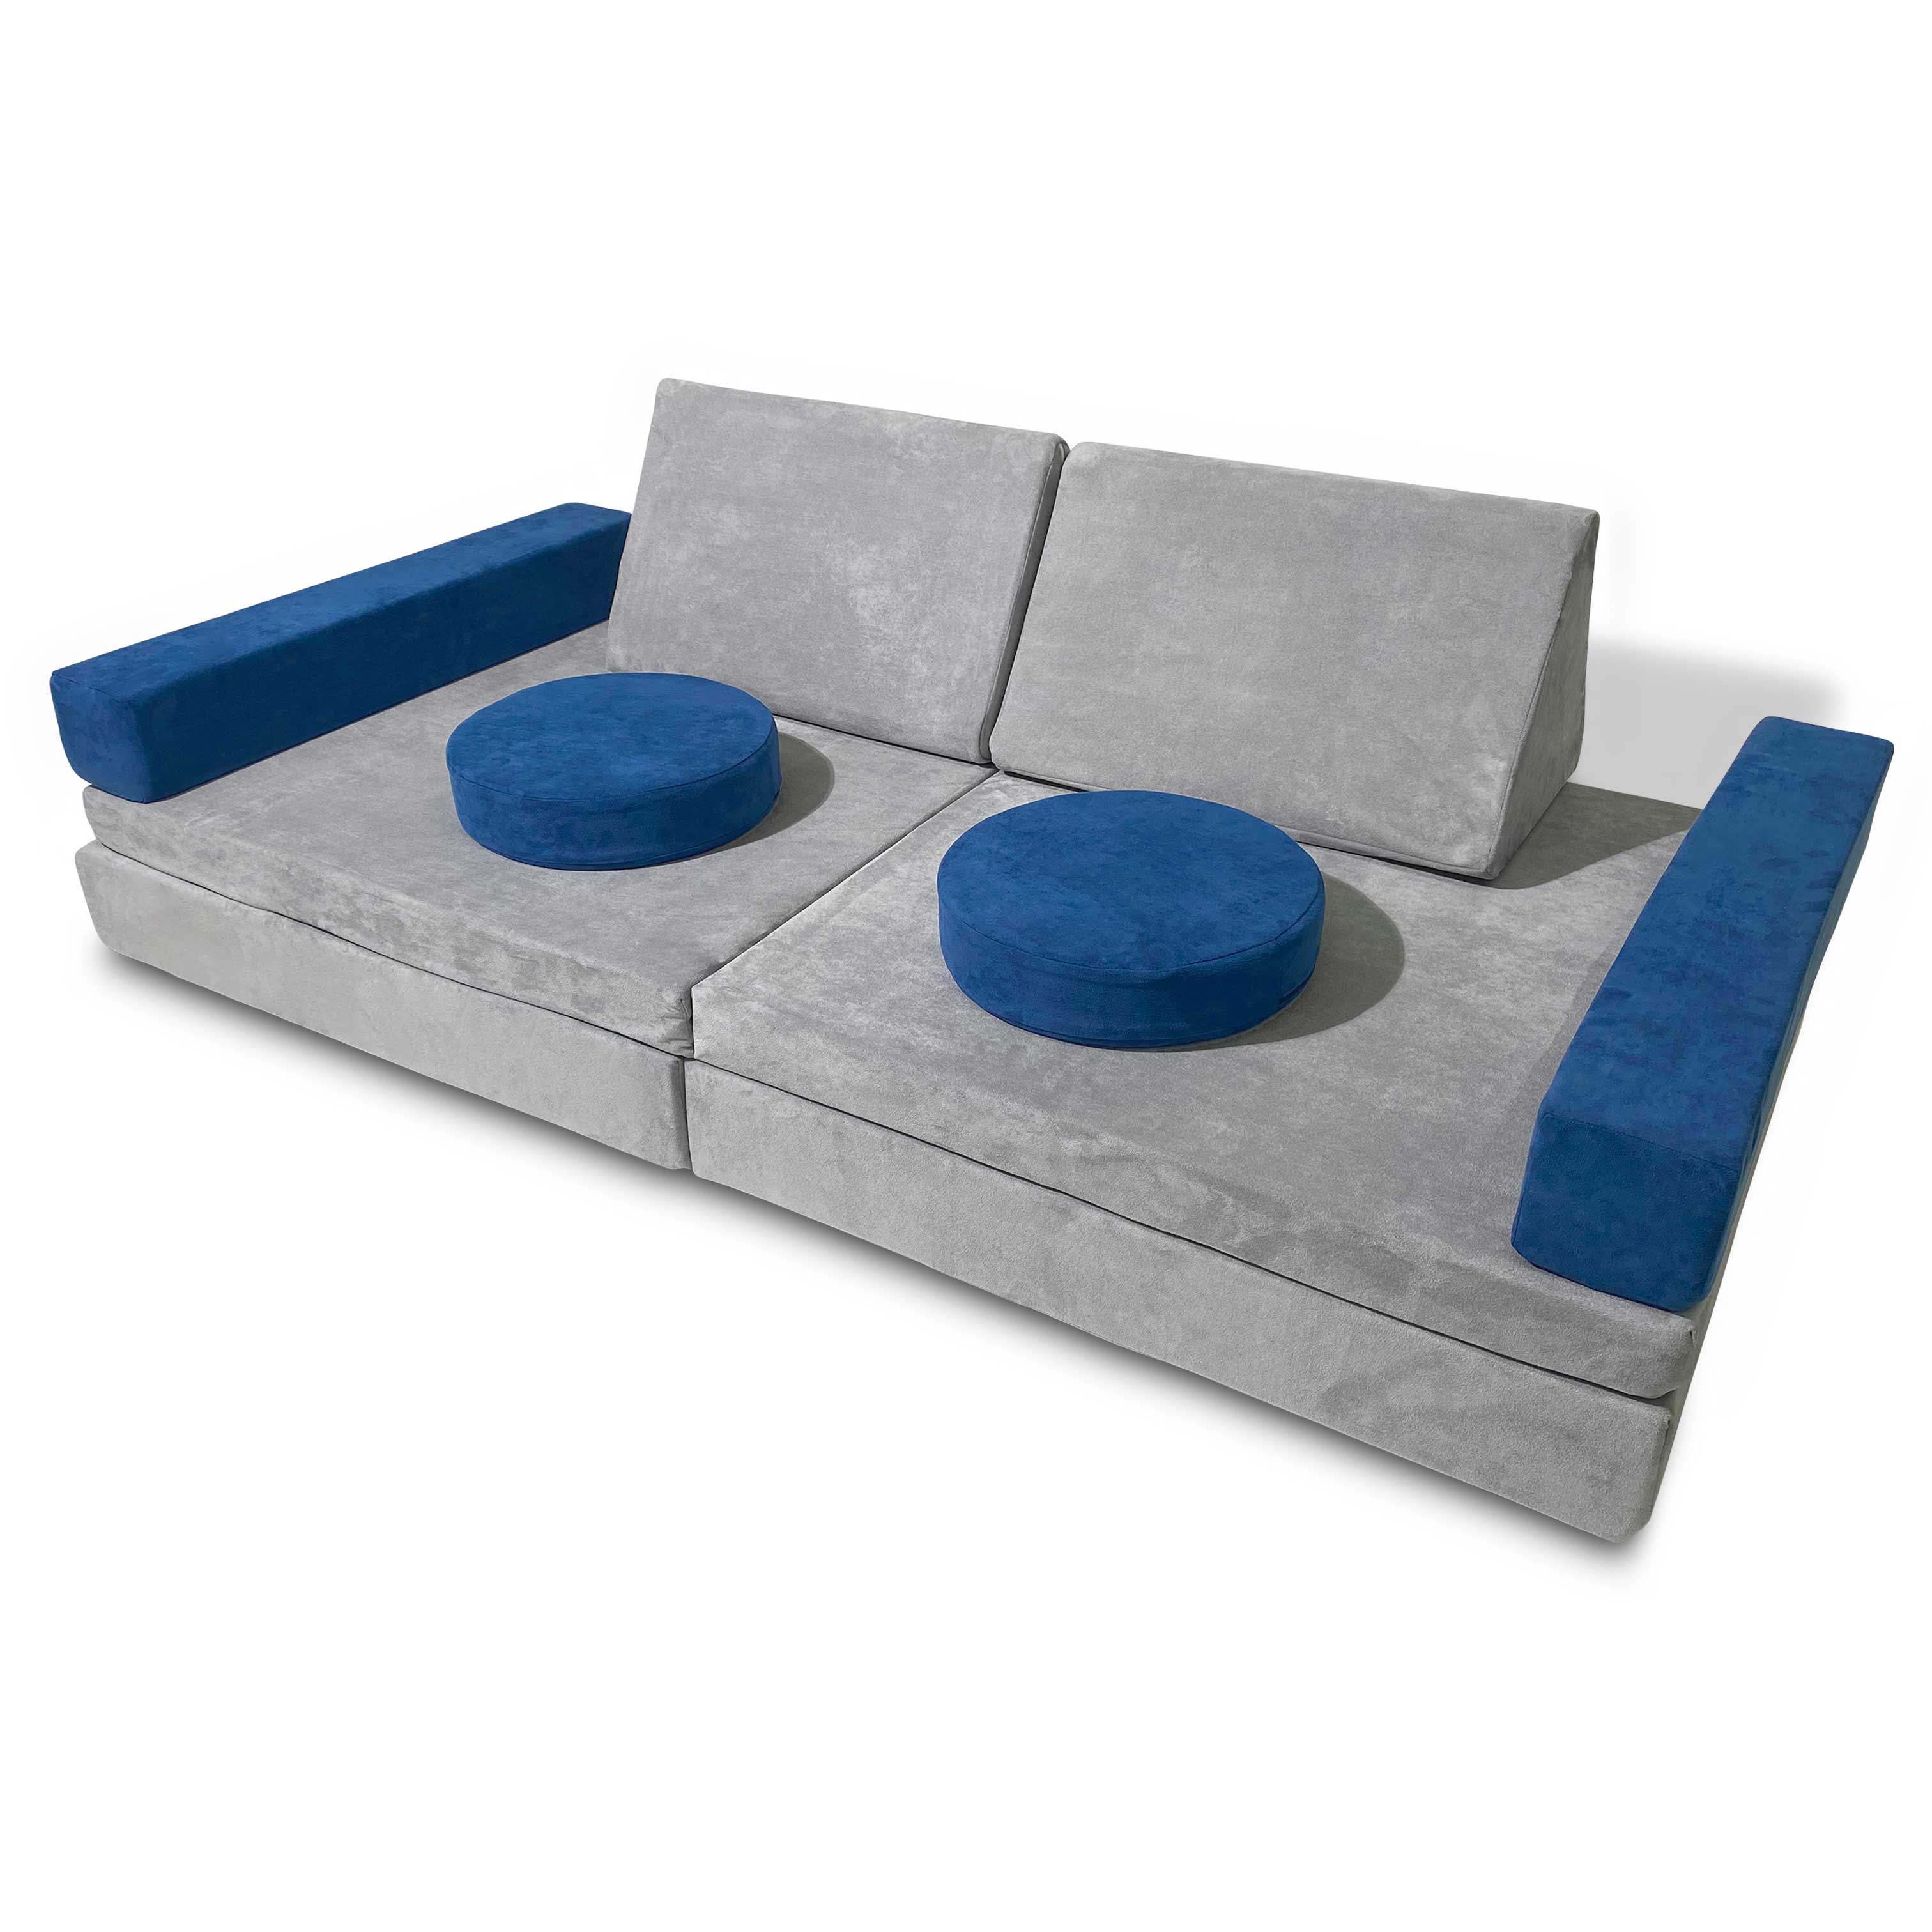 Mod Blox 2 Circle Pillow + 2 Armrests Add-On for Soft Furniture Playset Modular Microsuede Foam Play Couch for Creative Kids